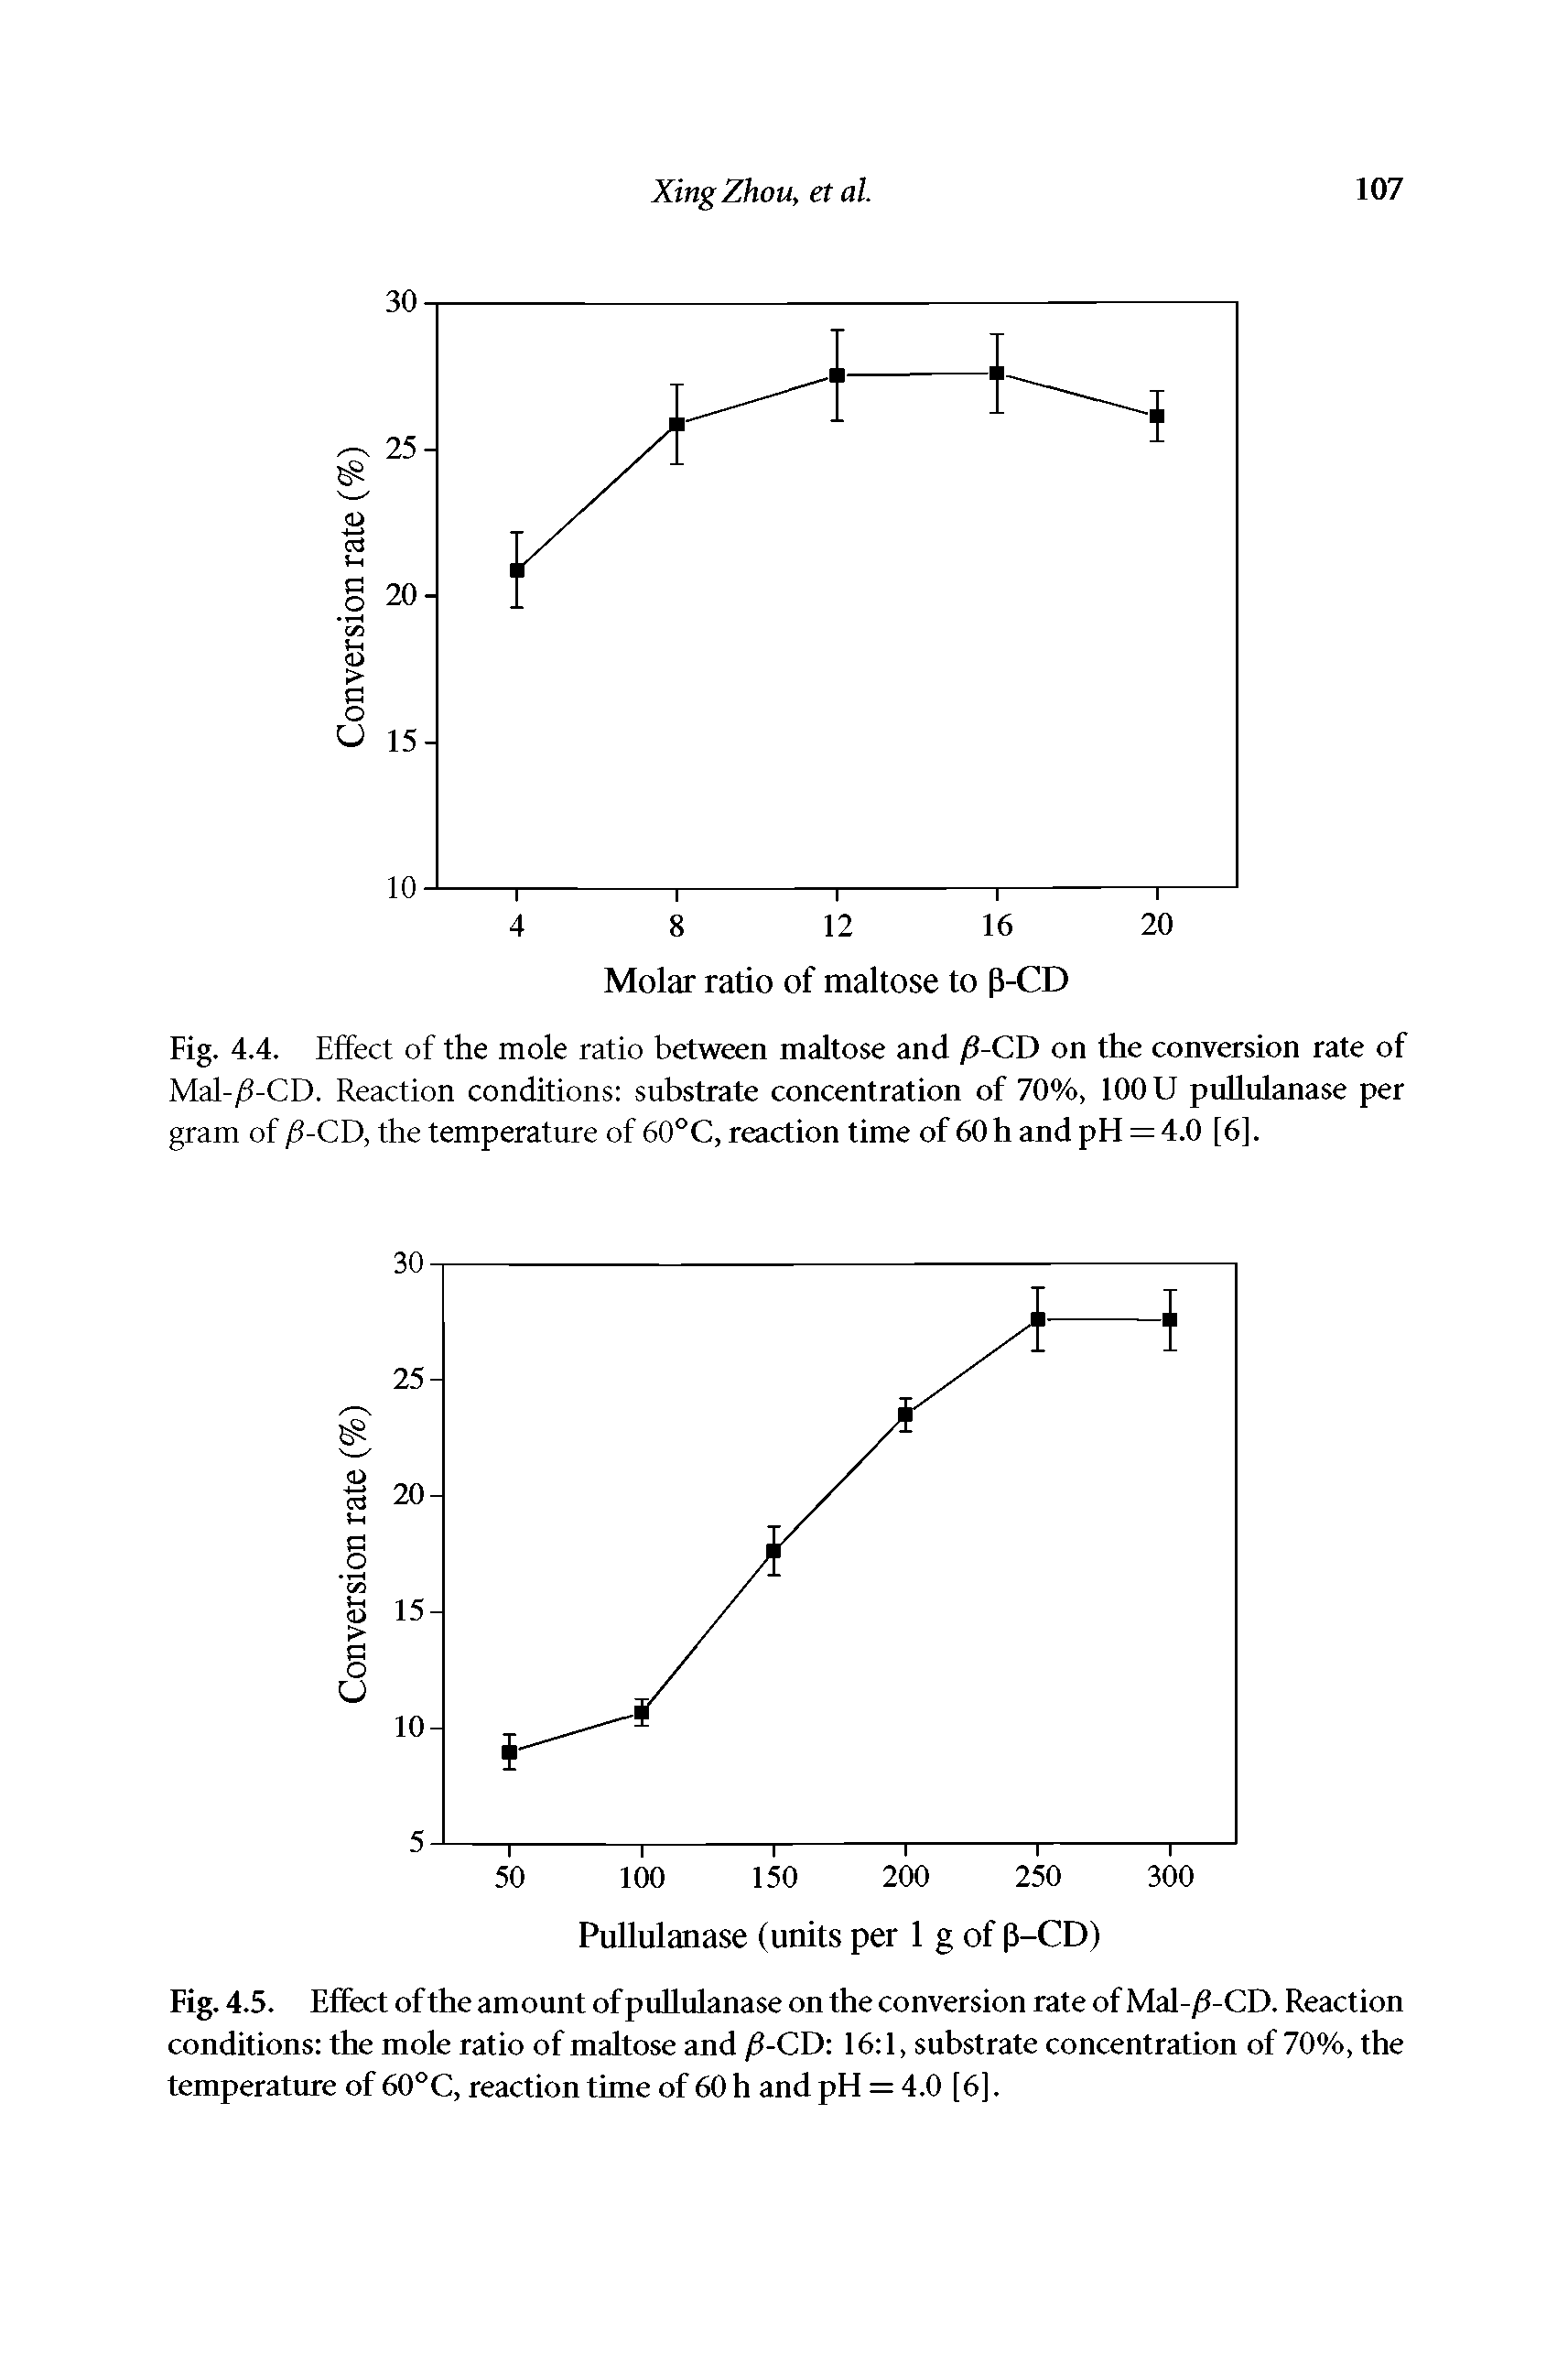 Fig. 4.4. Effect of the mole ratio between maltose and fi-CD on the conversion rate of Mal-/3-CD. Reaction conditions substrate concentration of 70%, 100 U puUulanase per gram of /S-CD, the temperature of 60°C, reaction time of 60 h and pH = 4.0 [6].